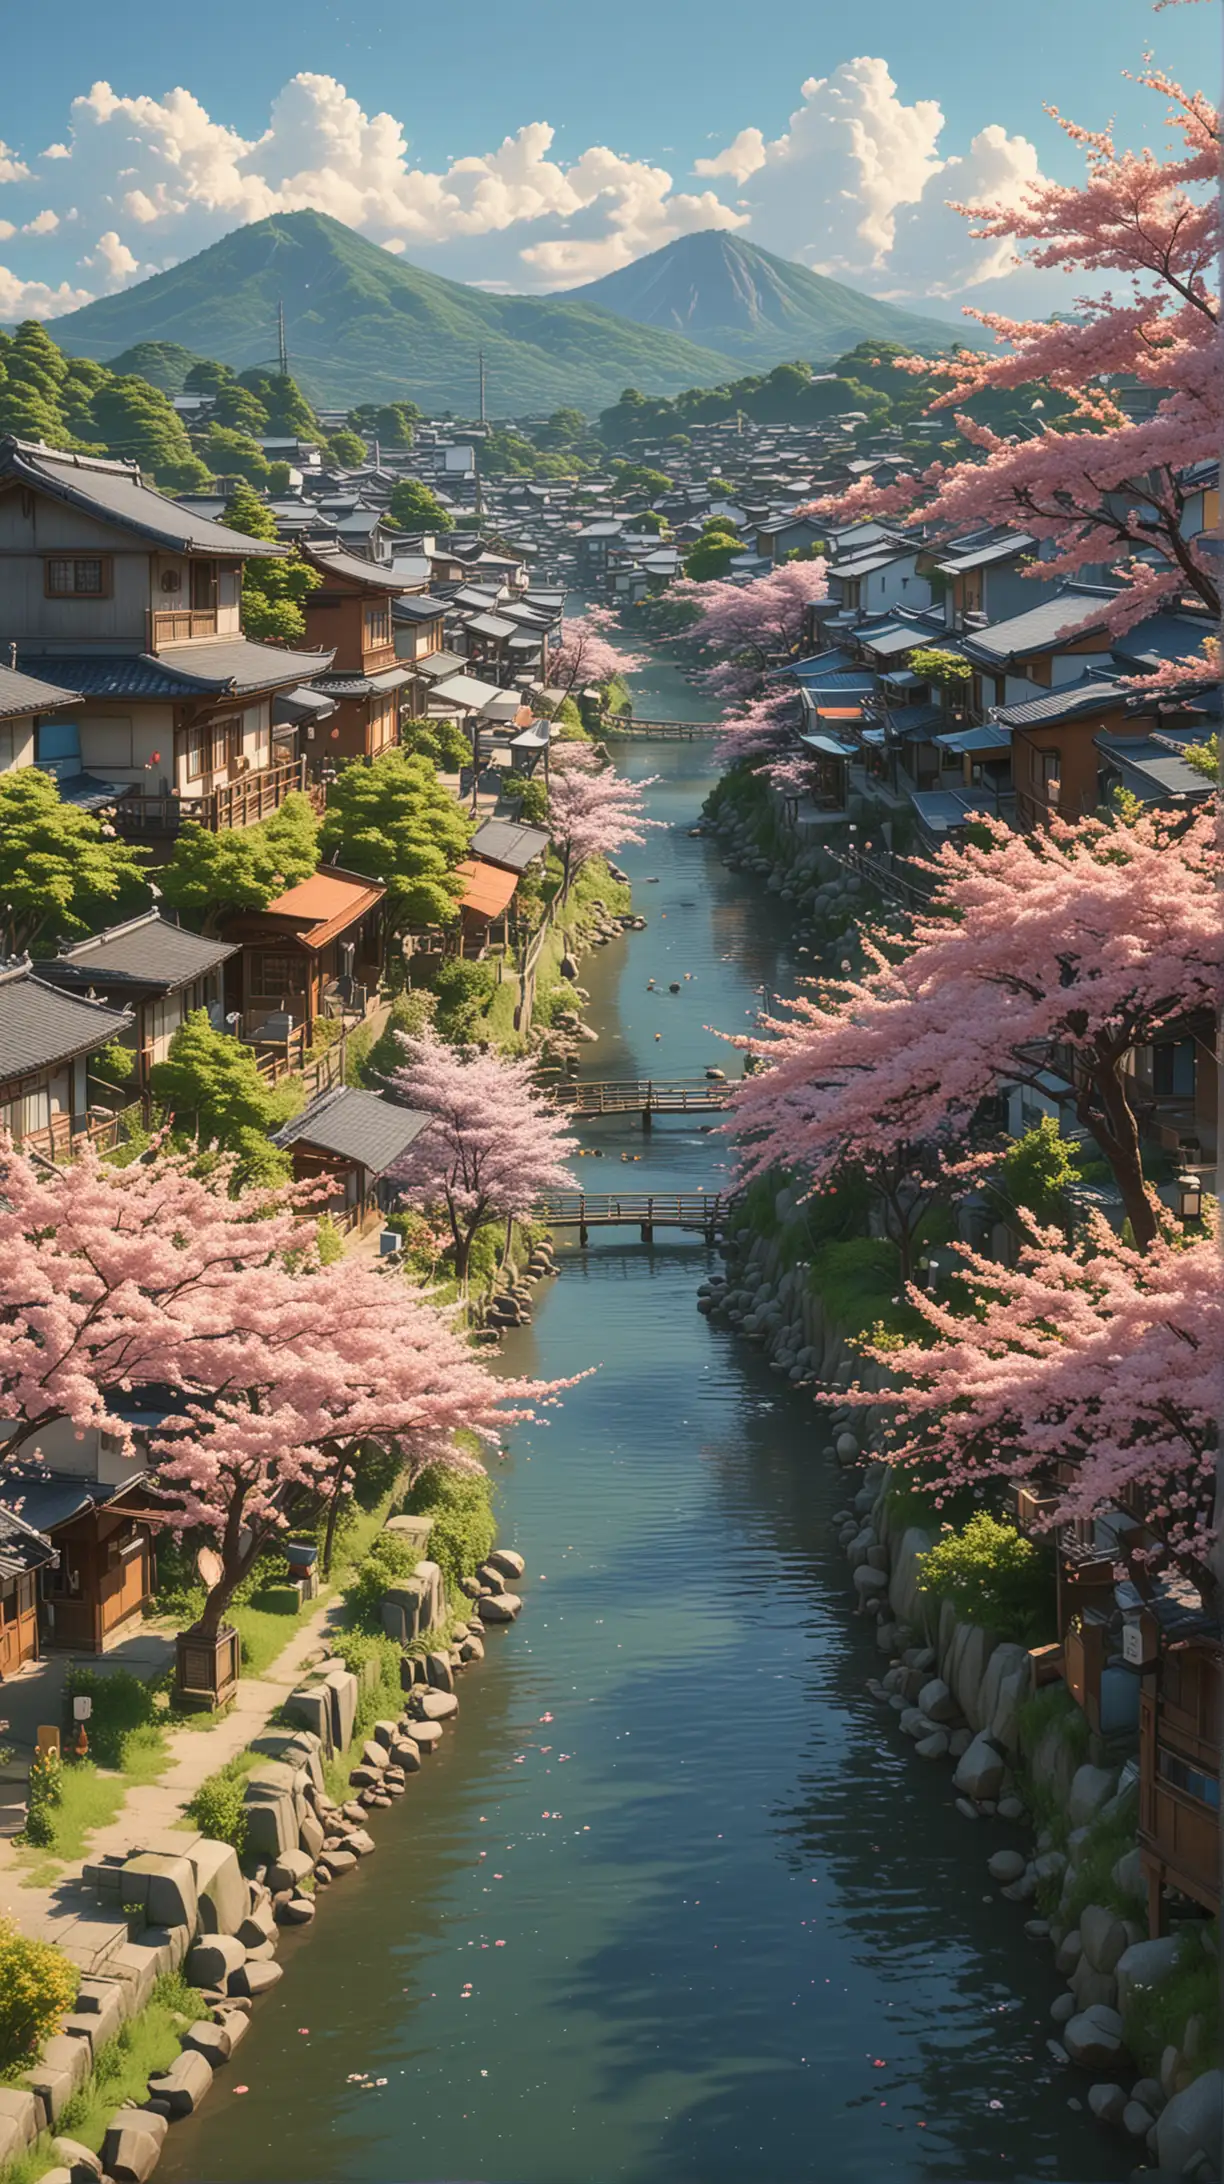 Summer vibes in small village in japan, vibrant variant flowers, beautiful sky,  neighbourhood, river, lush green, cherry blossom, oranges tree, kids playing, Ghibli studio style, Makoto Shinkai, Render 8k, acrylic palette colors, Ultra detailed, --ar MJ C v 6.0, stable diffusion, 3D effect